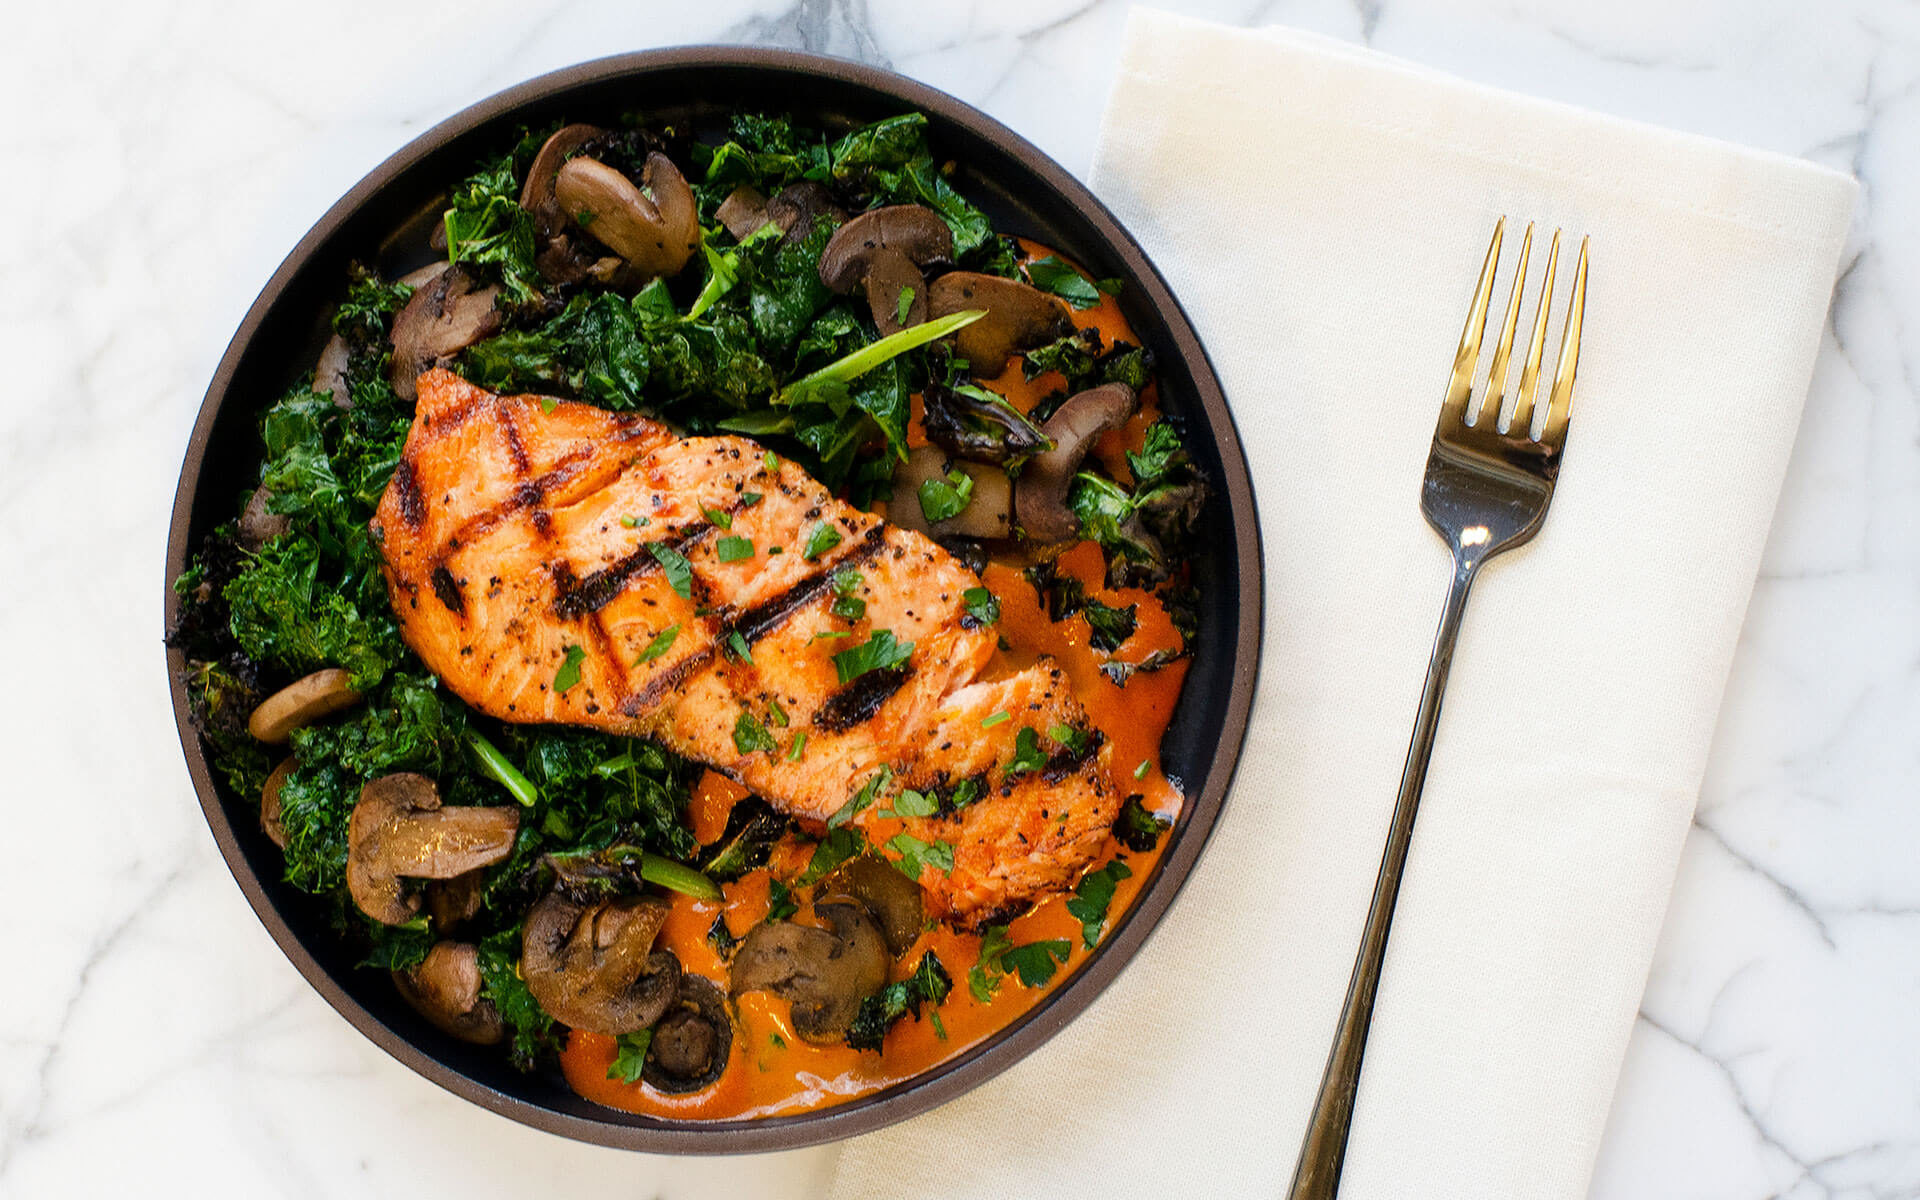 salmon, mushrooms and greens on a plate